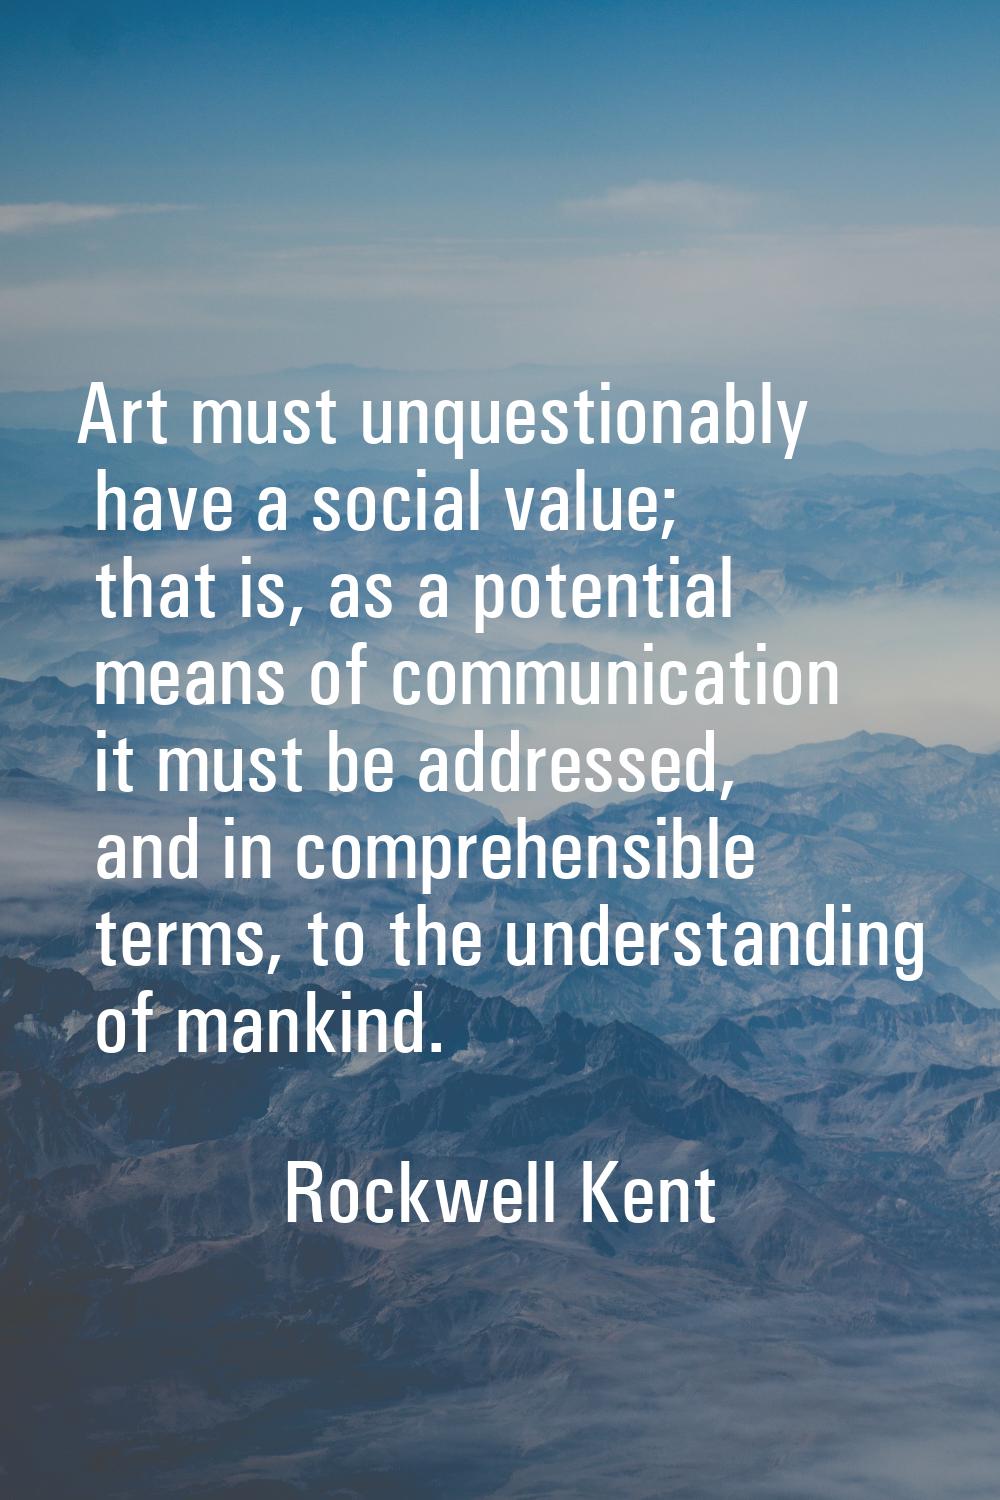 Art must unquestionably have a social value; that is, as a potential means of communication it must